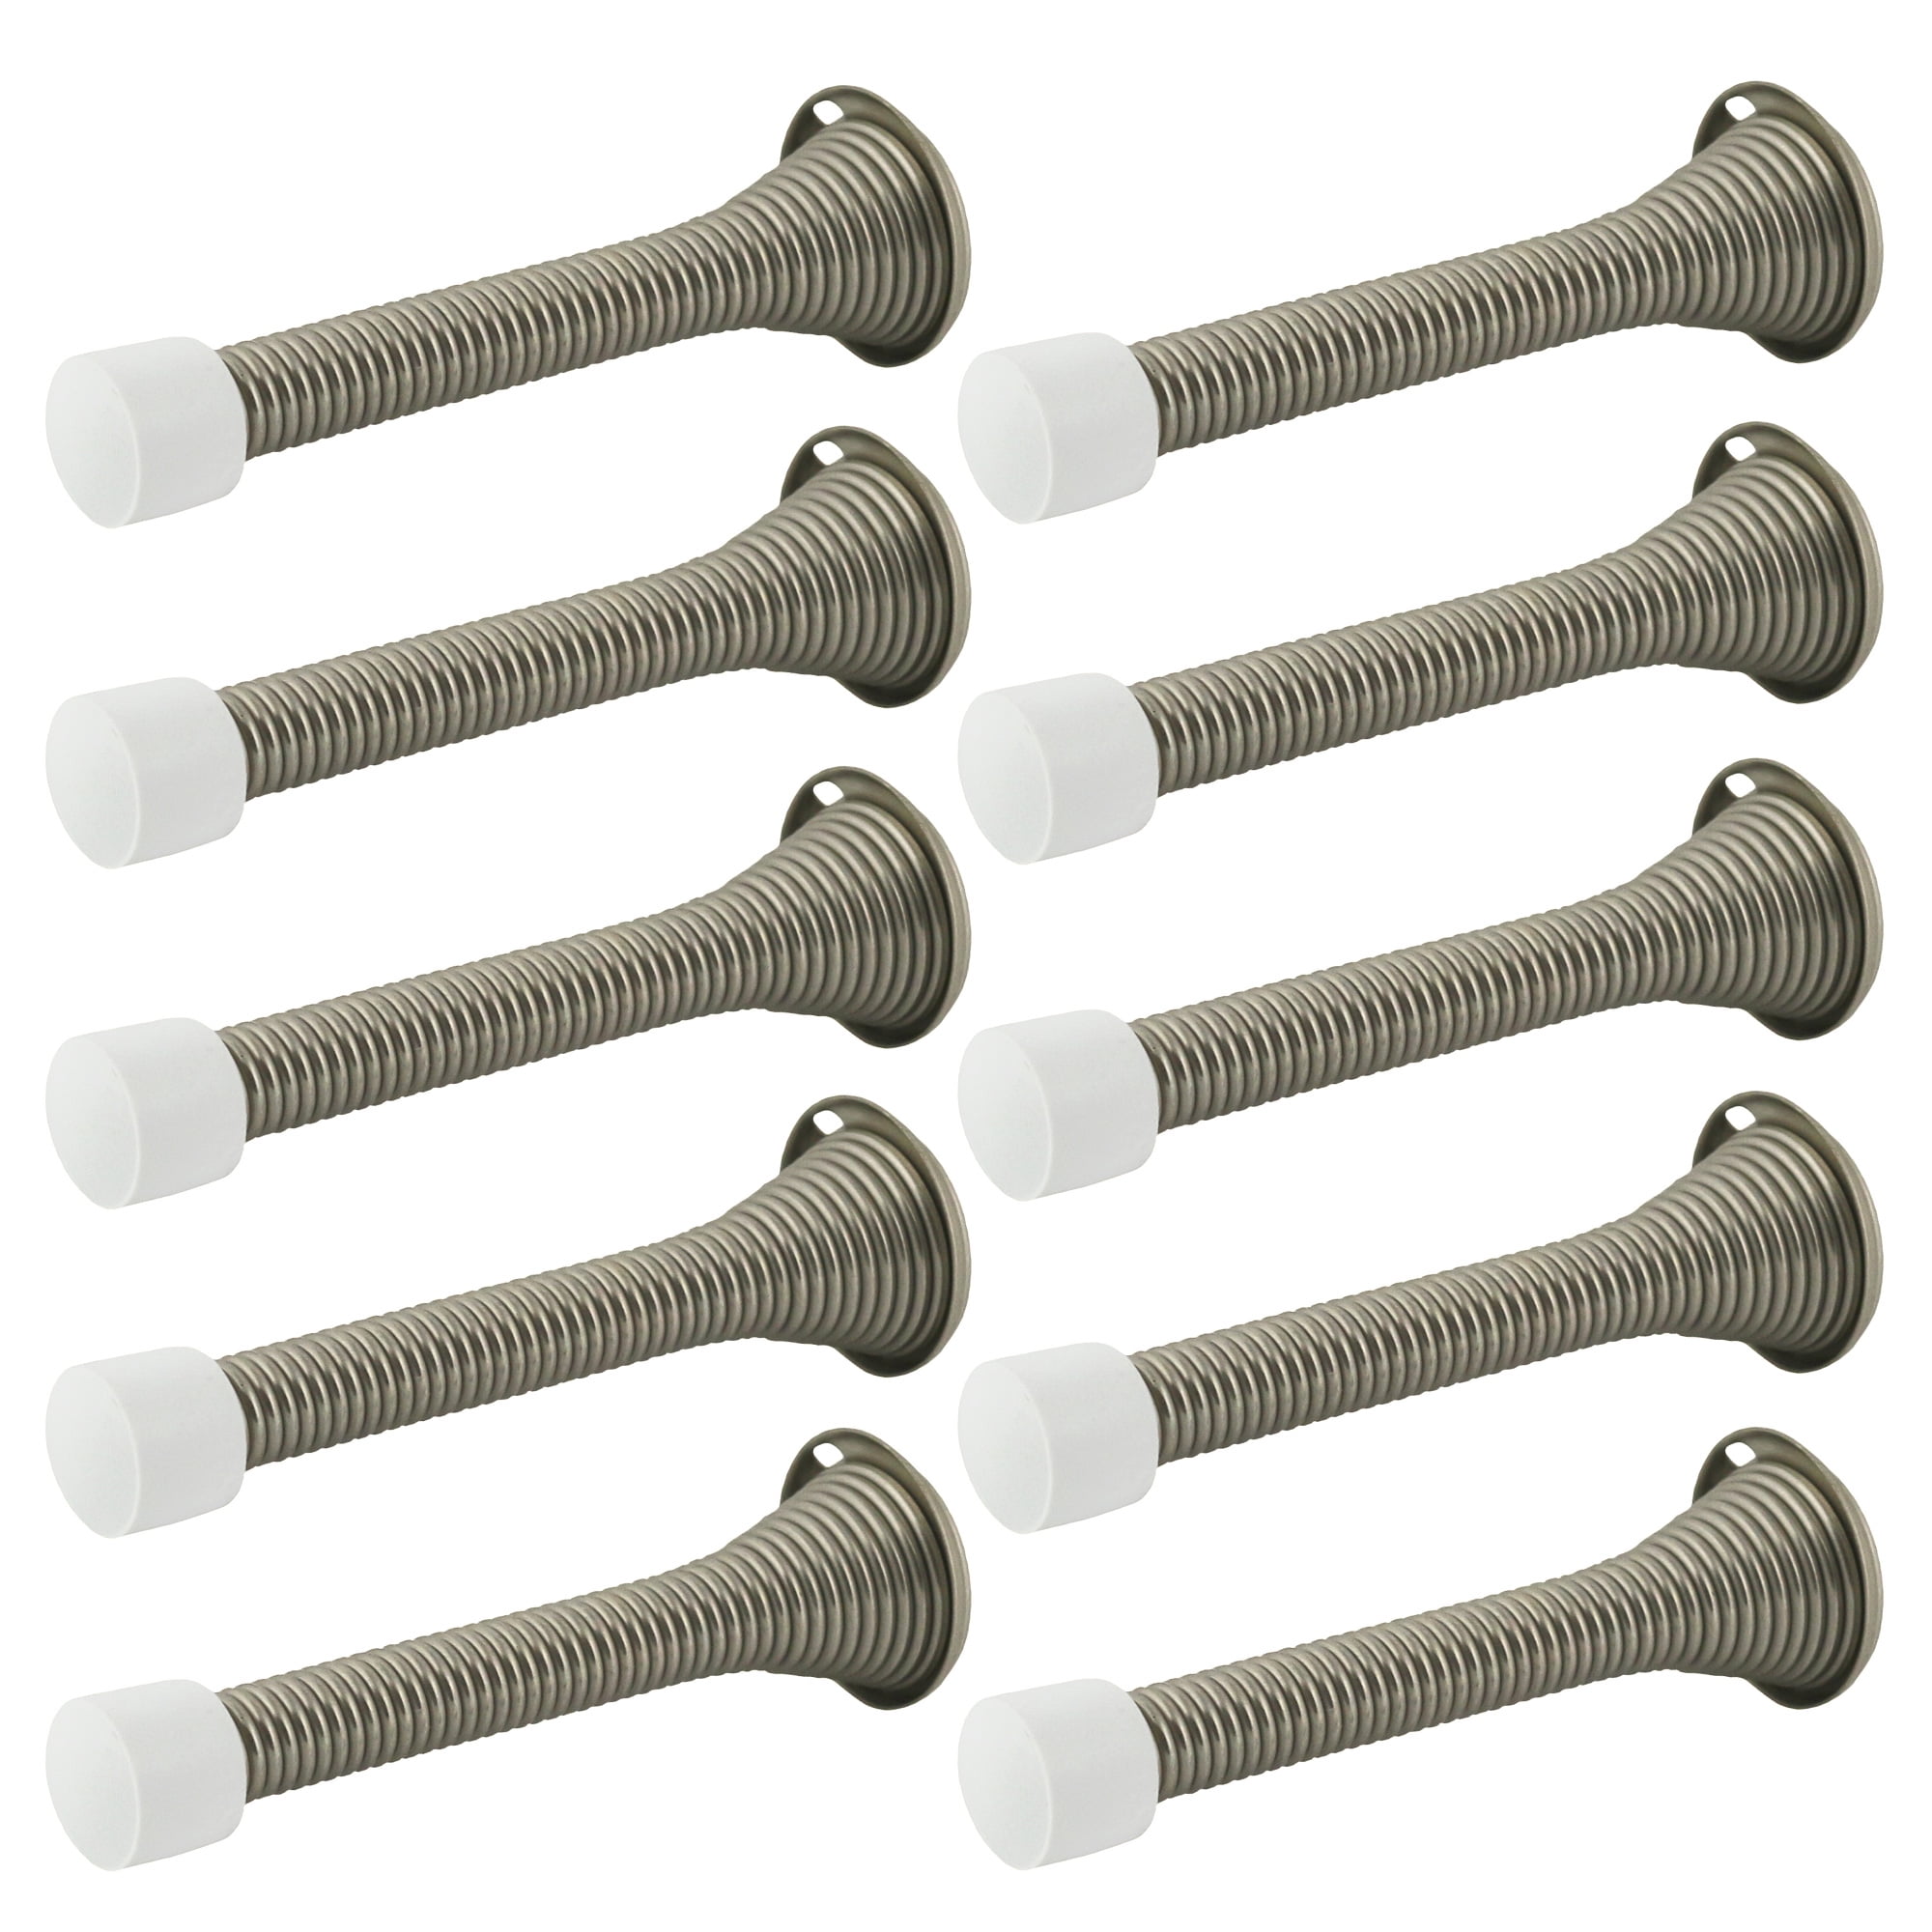 BCP 5pcs 3-1/8 inches Brushed Nickel Flexi Spring Door Stopper